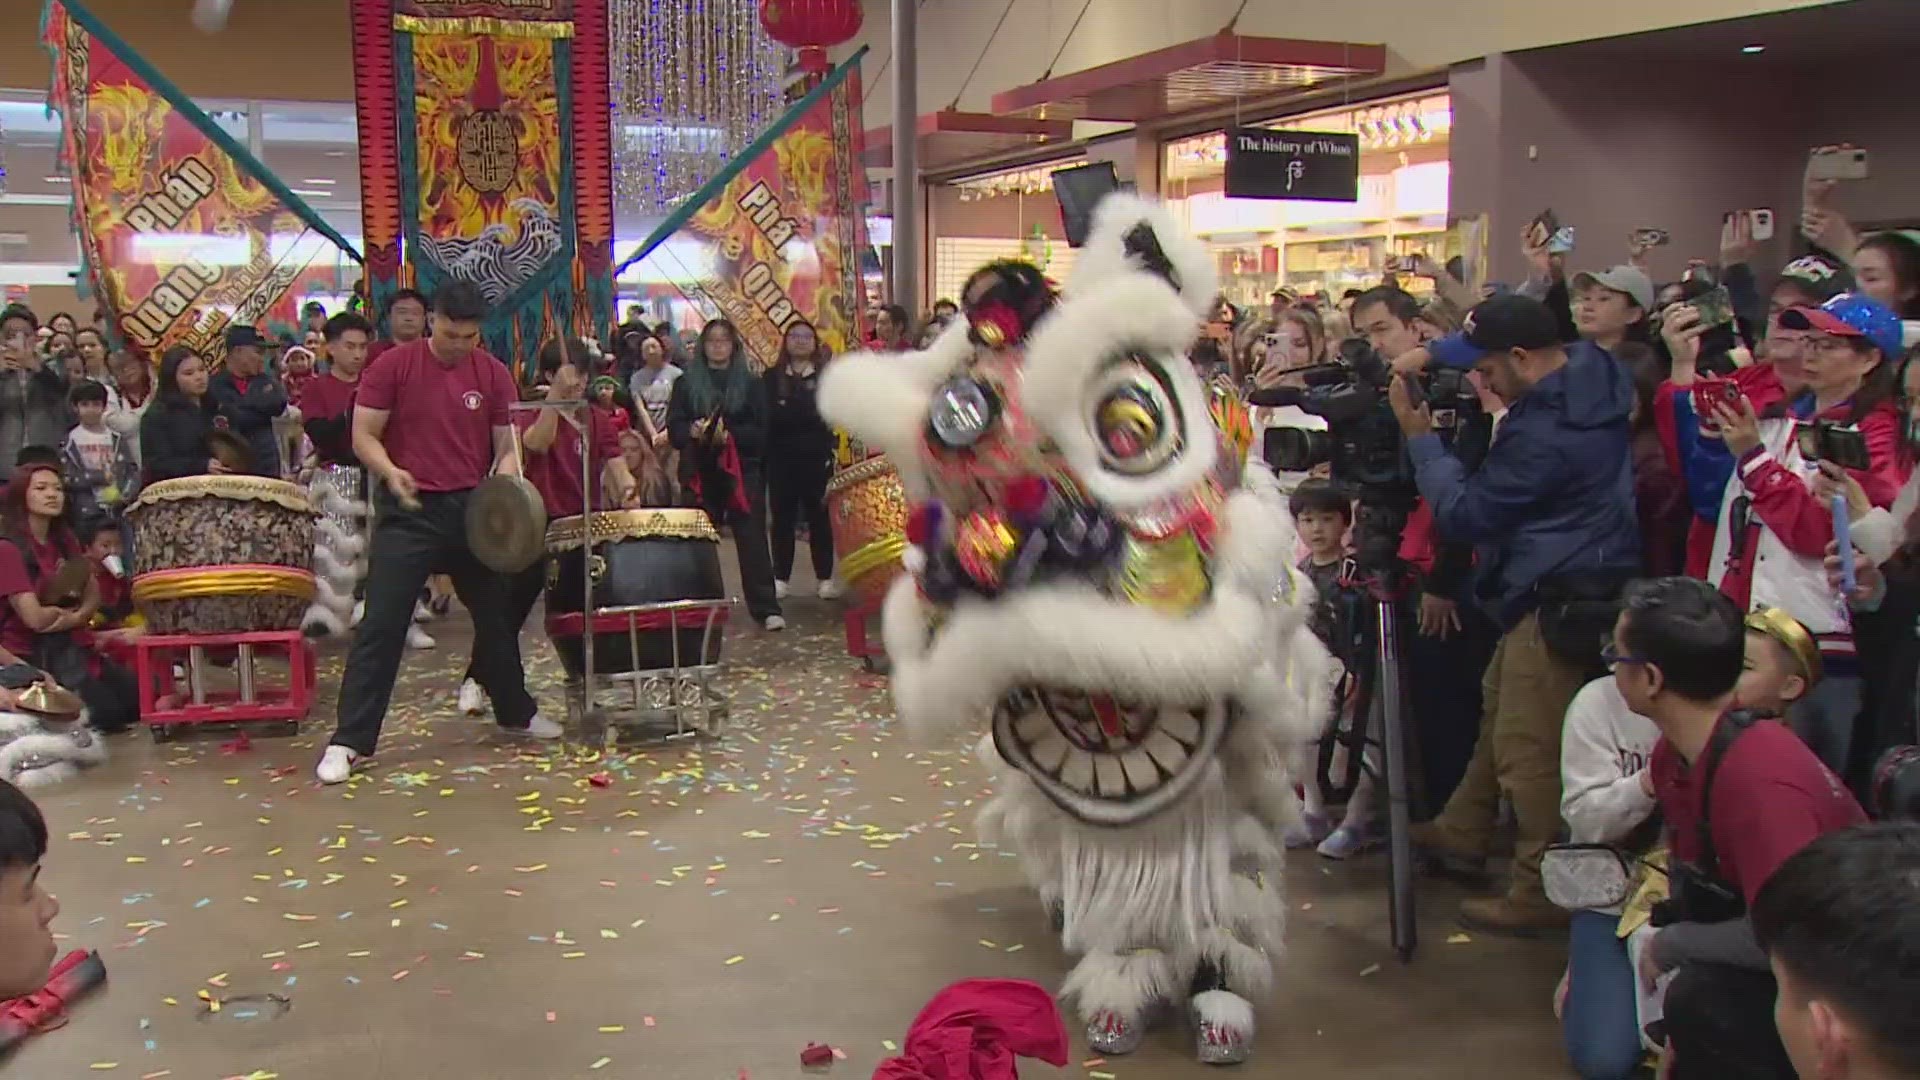 People gathered Saturday in Grand Prairie to celebrate the Year of the Dragon.